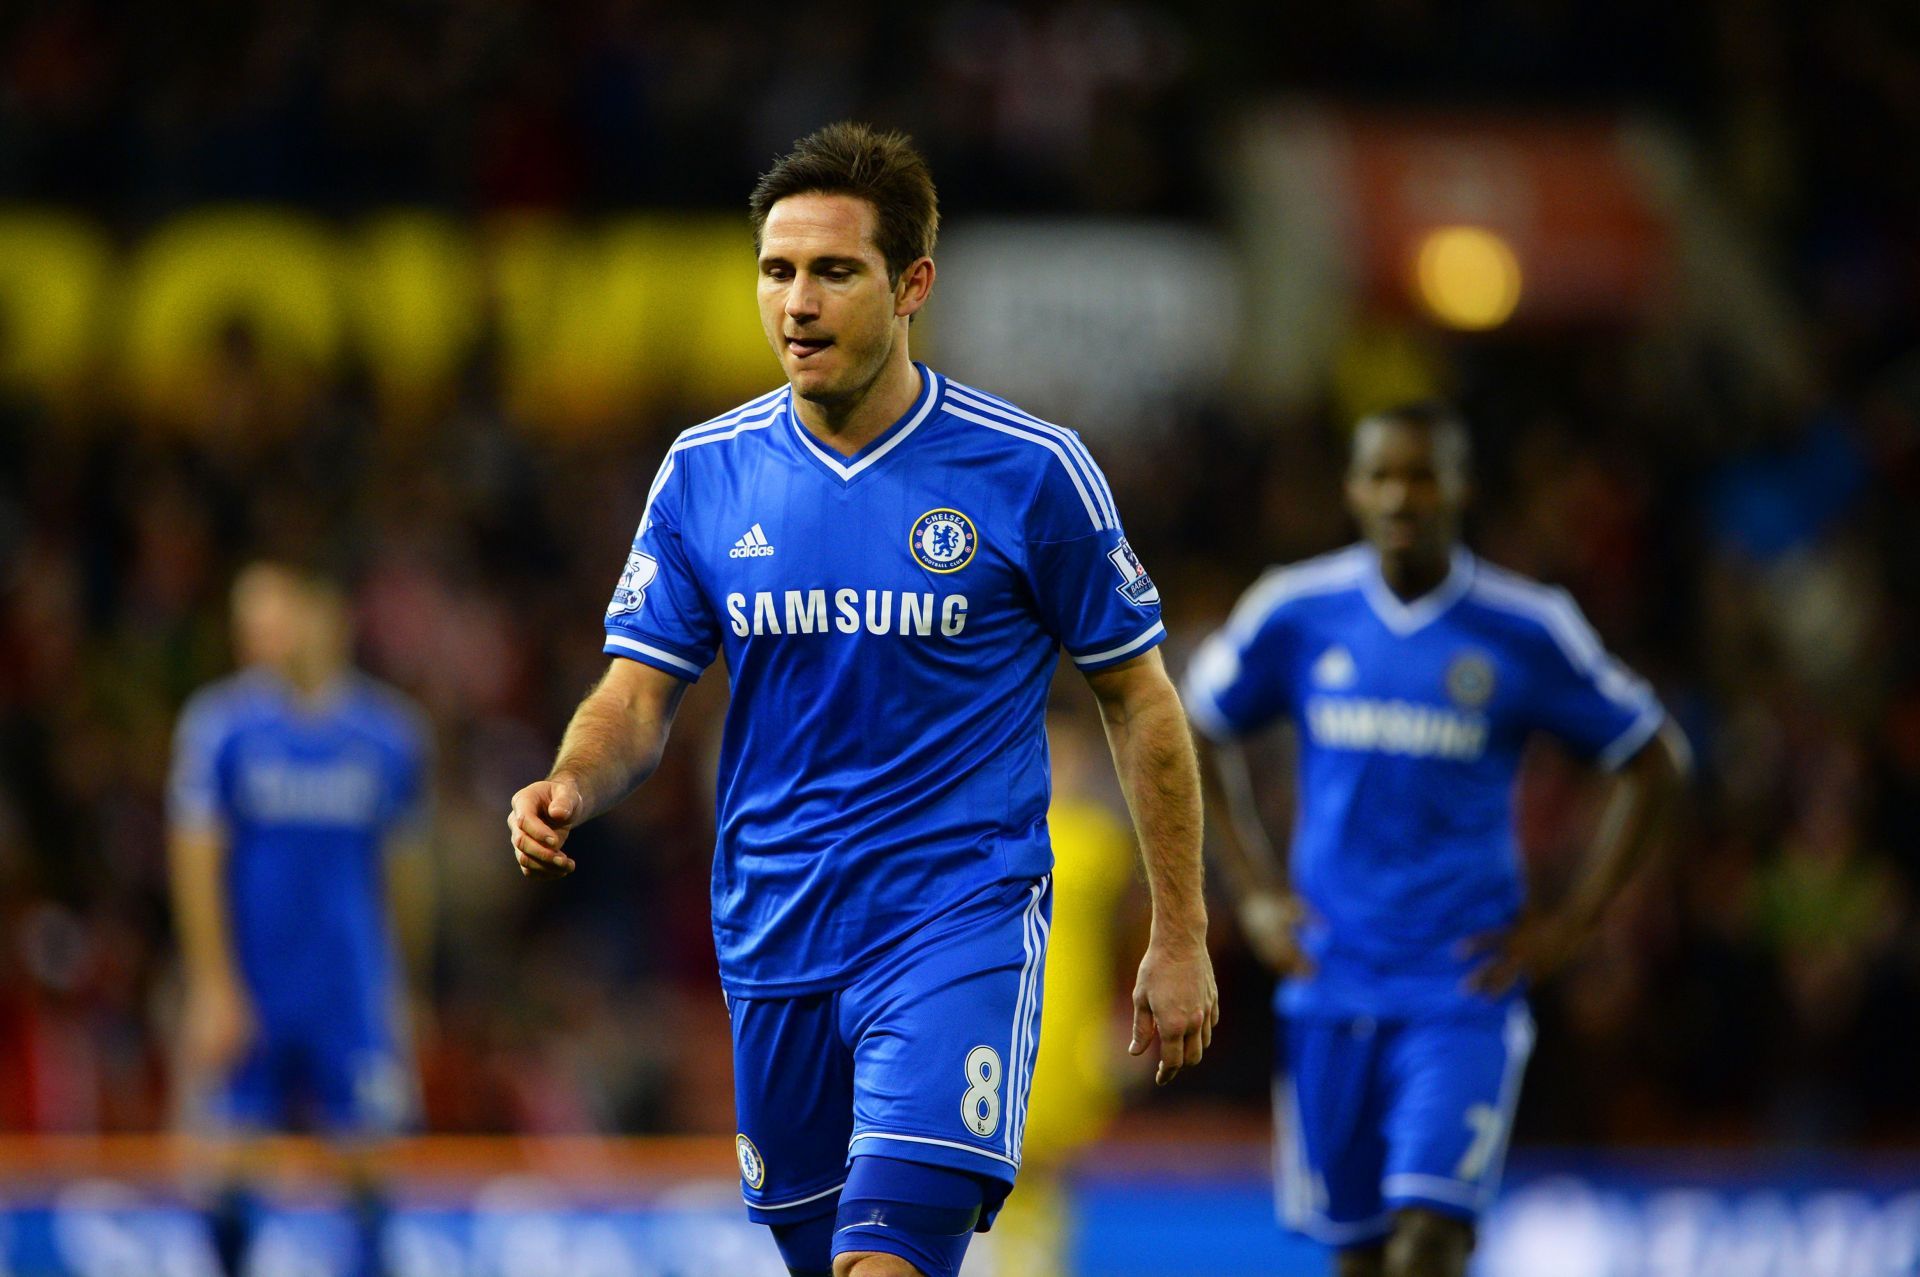 Frank Lampard is one of nine players and the only midfielder to have scored more than 150 goals in the Premier League